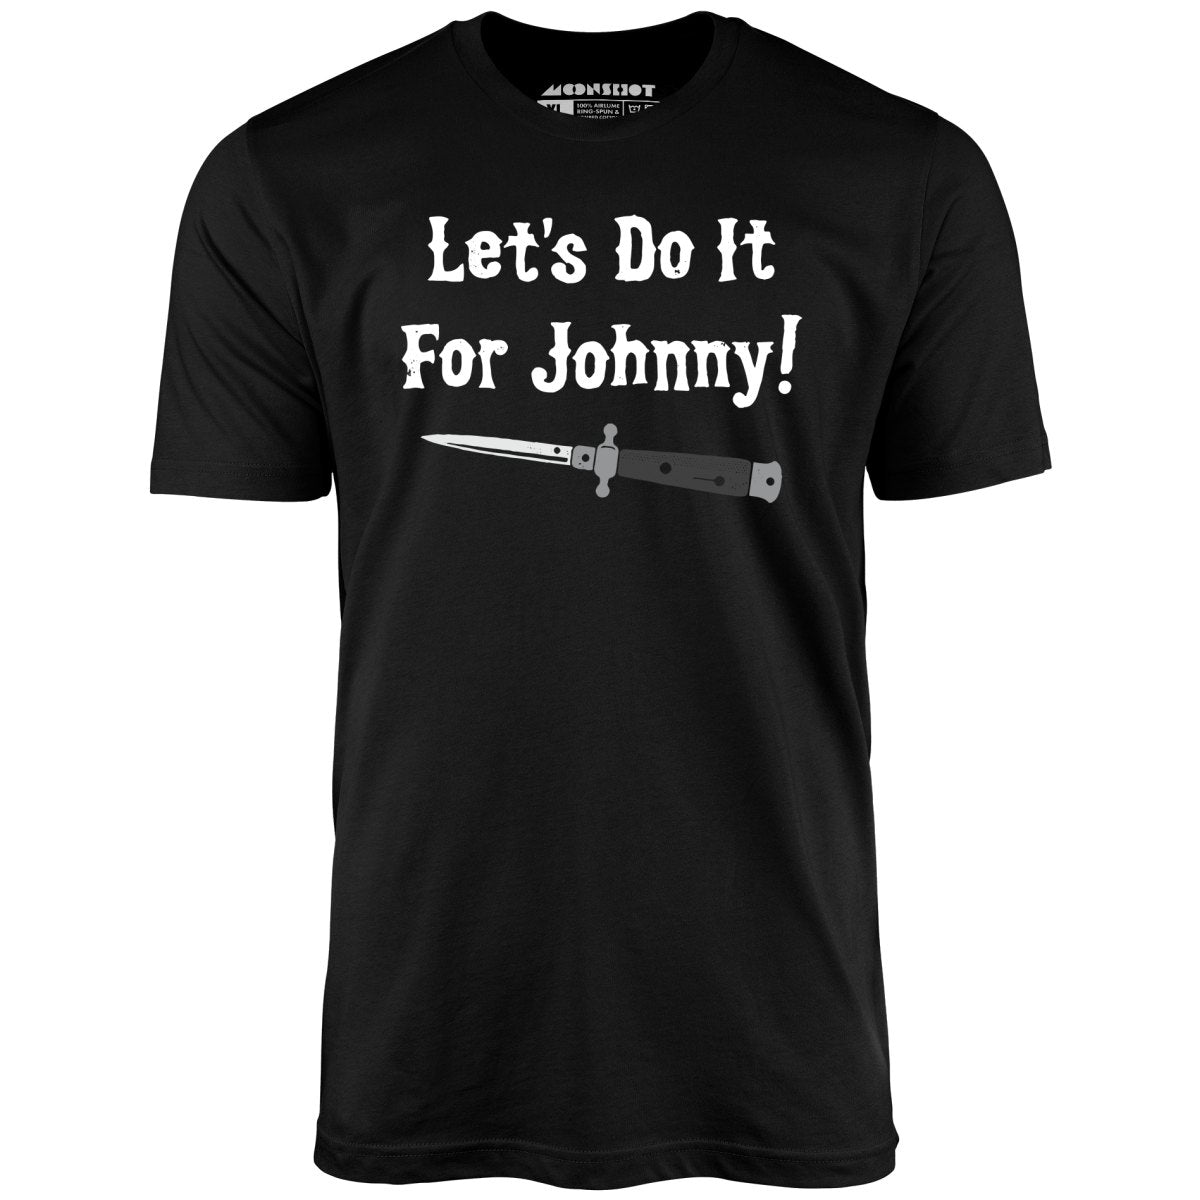 Let's Do it For Johnny - Outsiders - Unisex T-Shirt